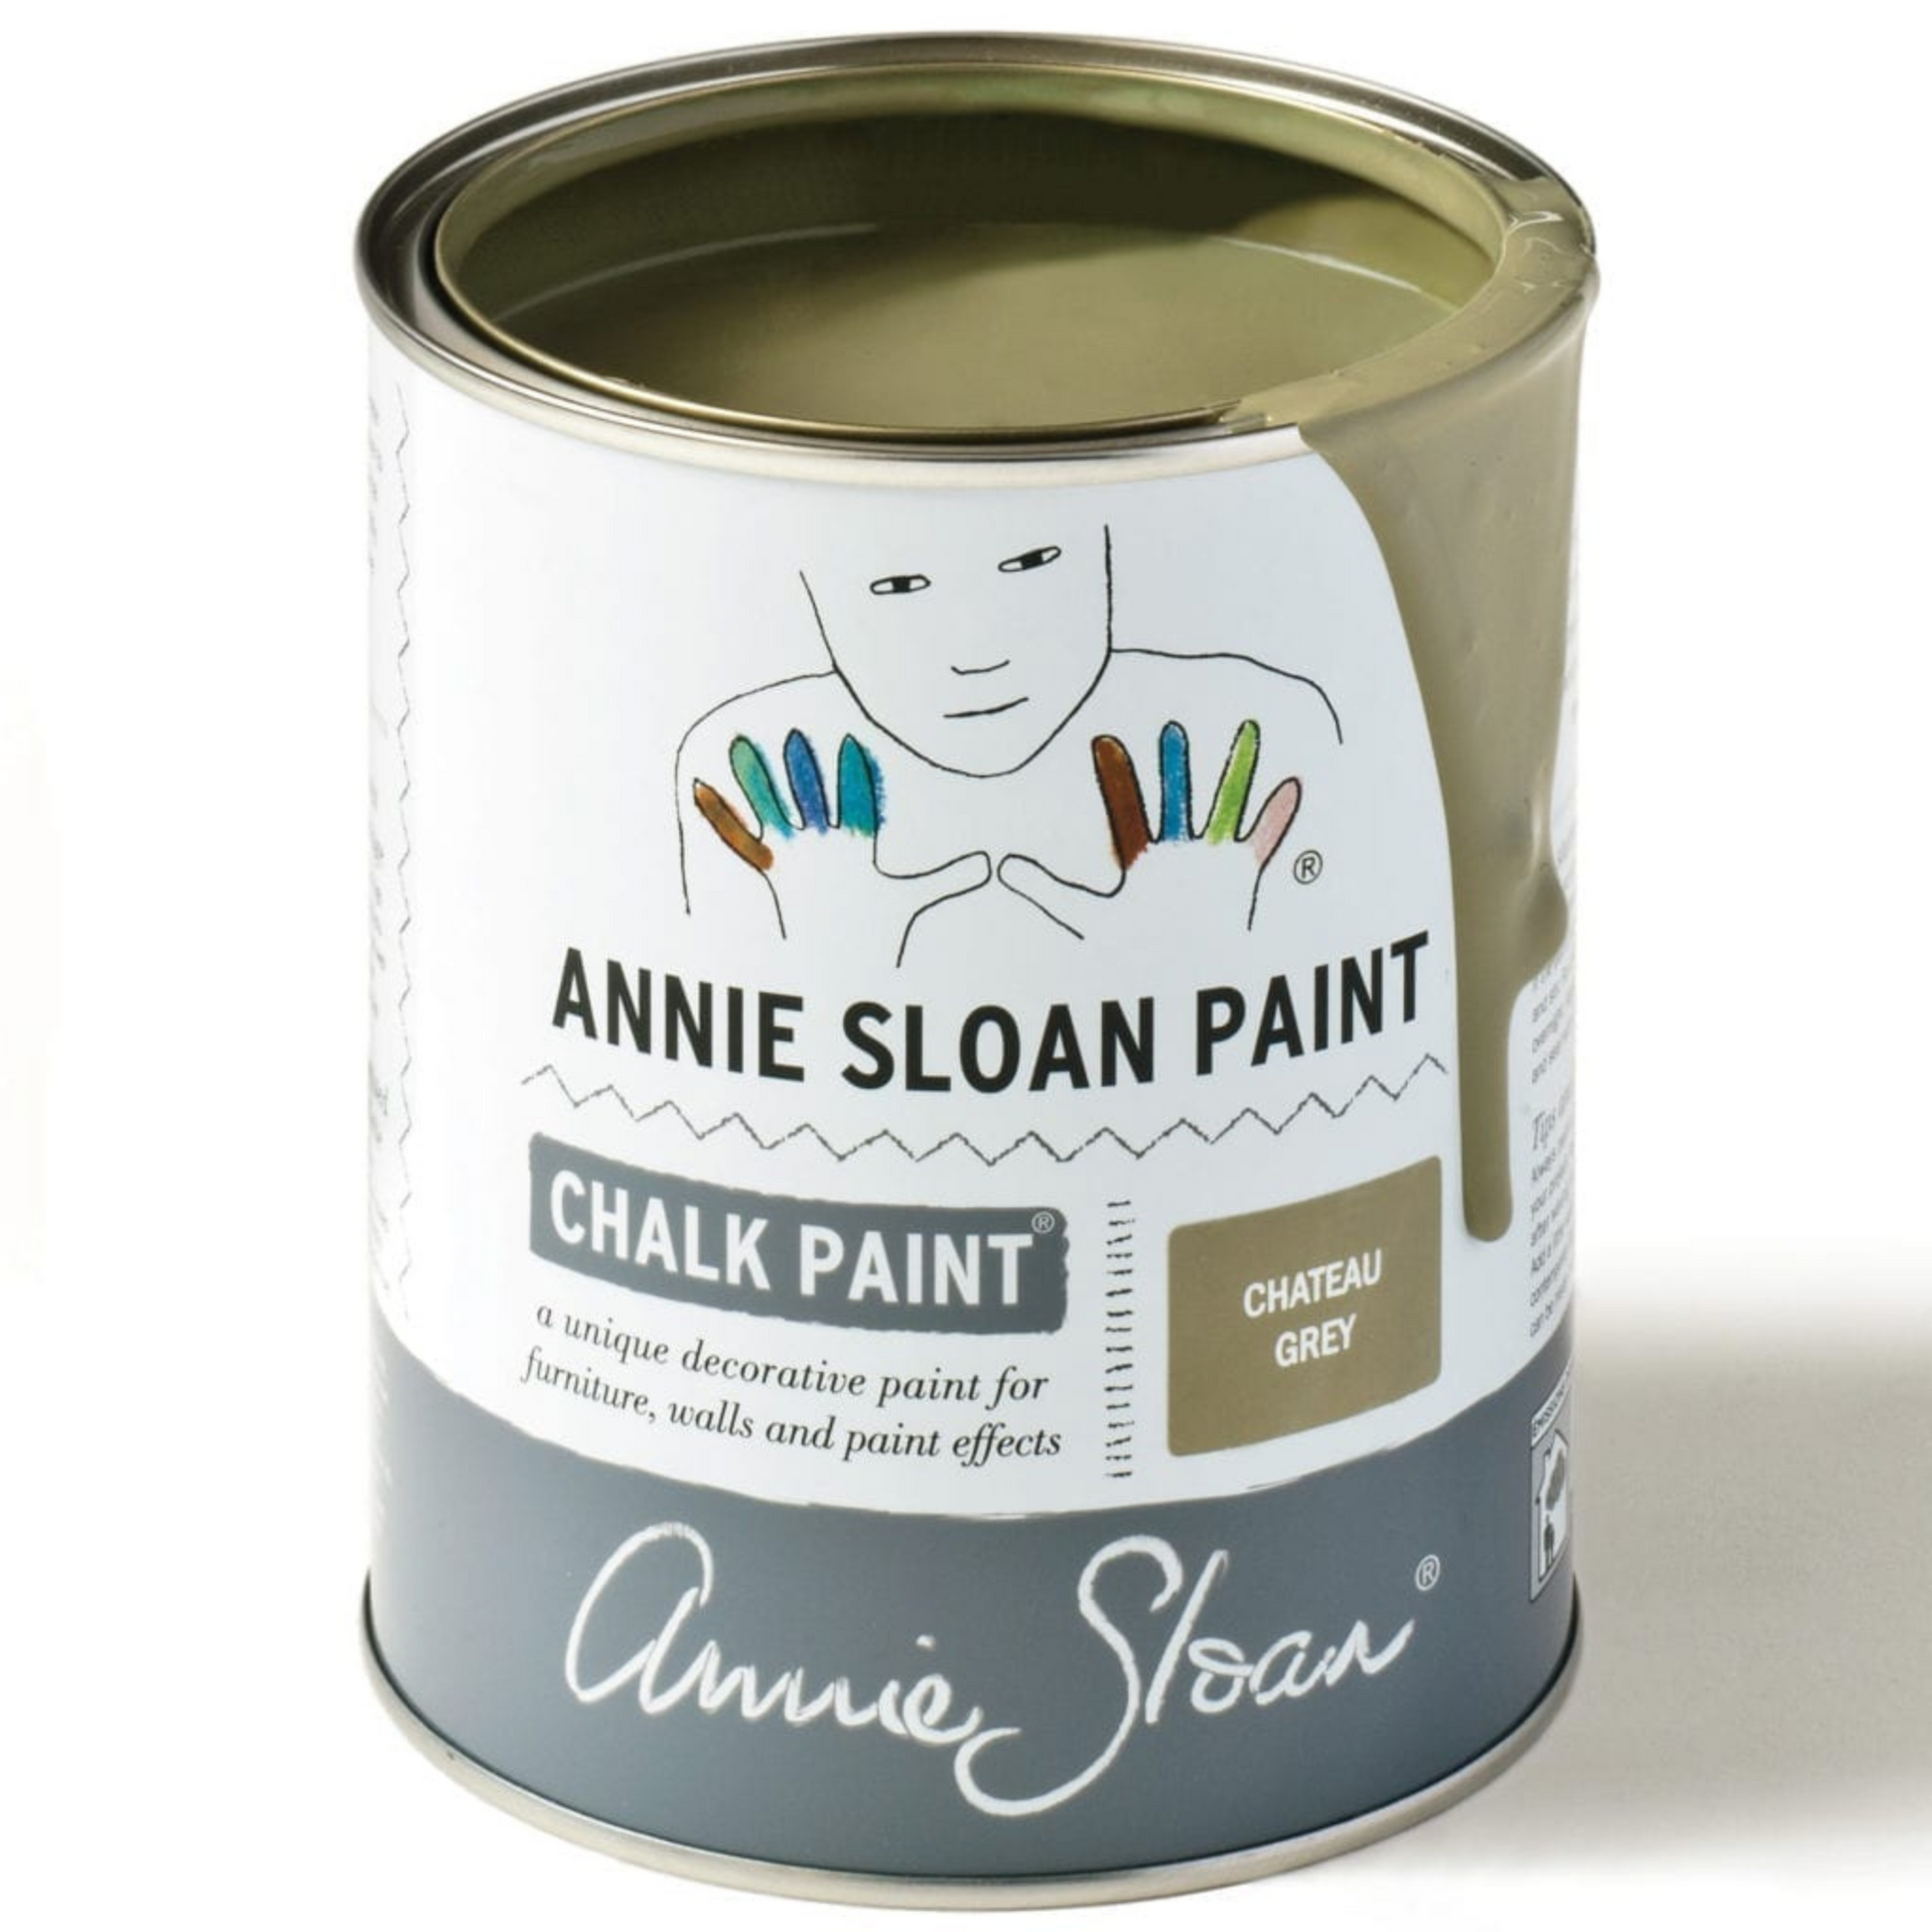 Can of Chateau Grey Annie Sloan Chalk Paint.